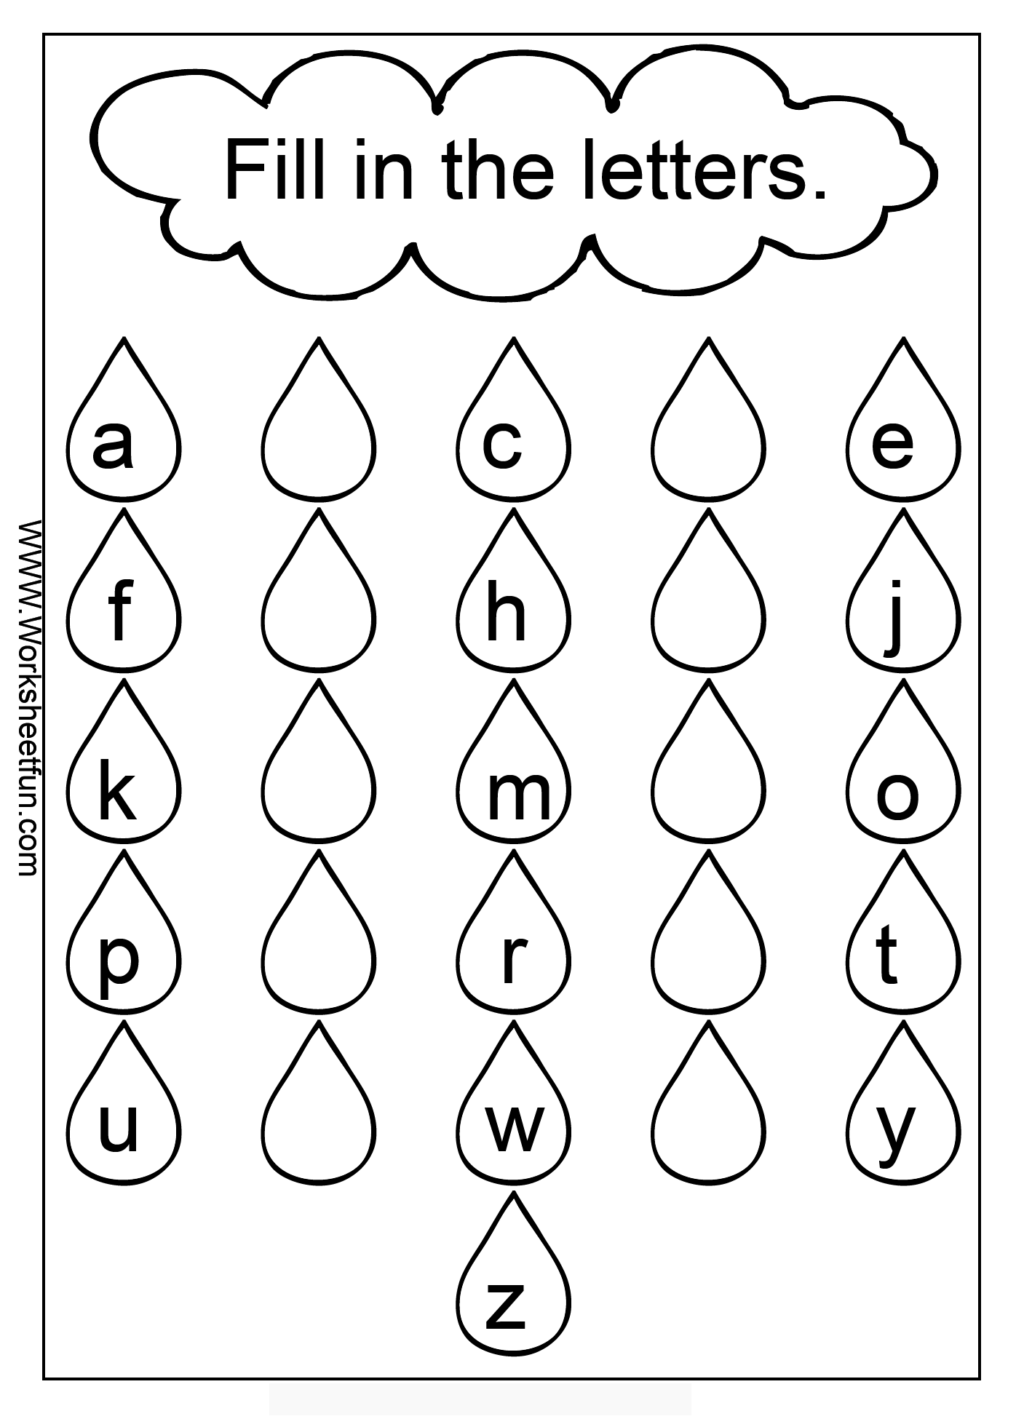 Worksheet ~ Alphabet Lettersrintables To Cut It As An Flash with regard to Letter N Worksheets Sparklebox